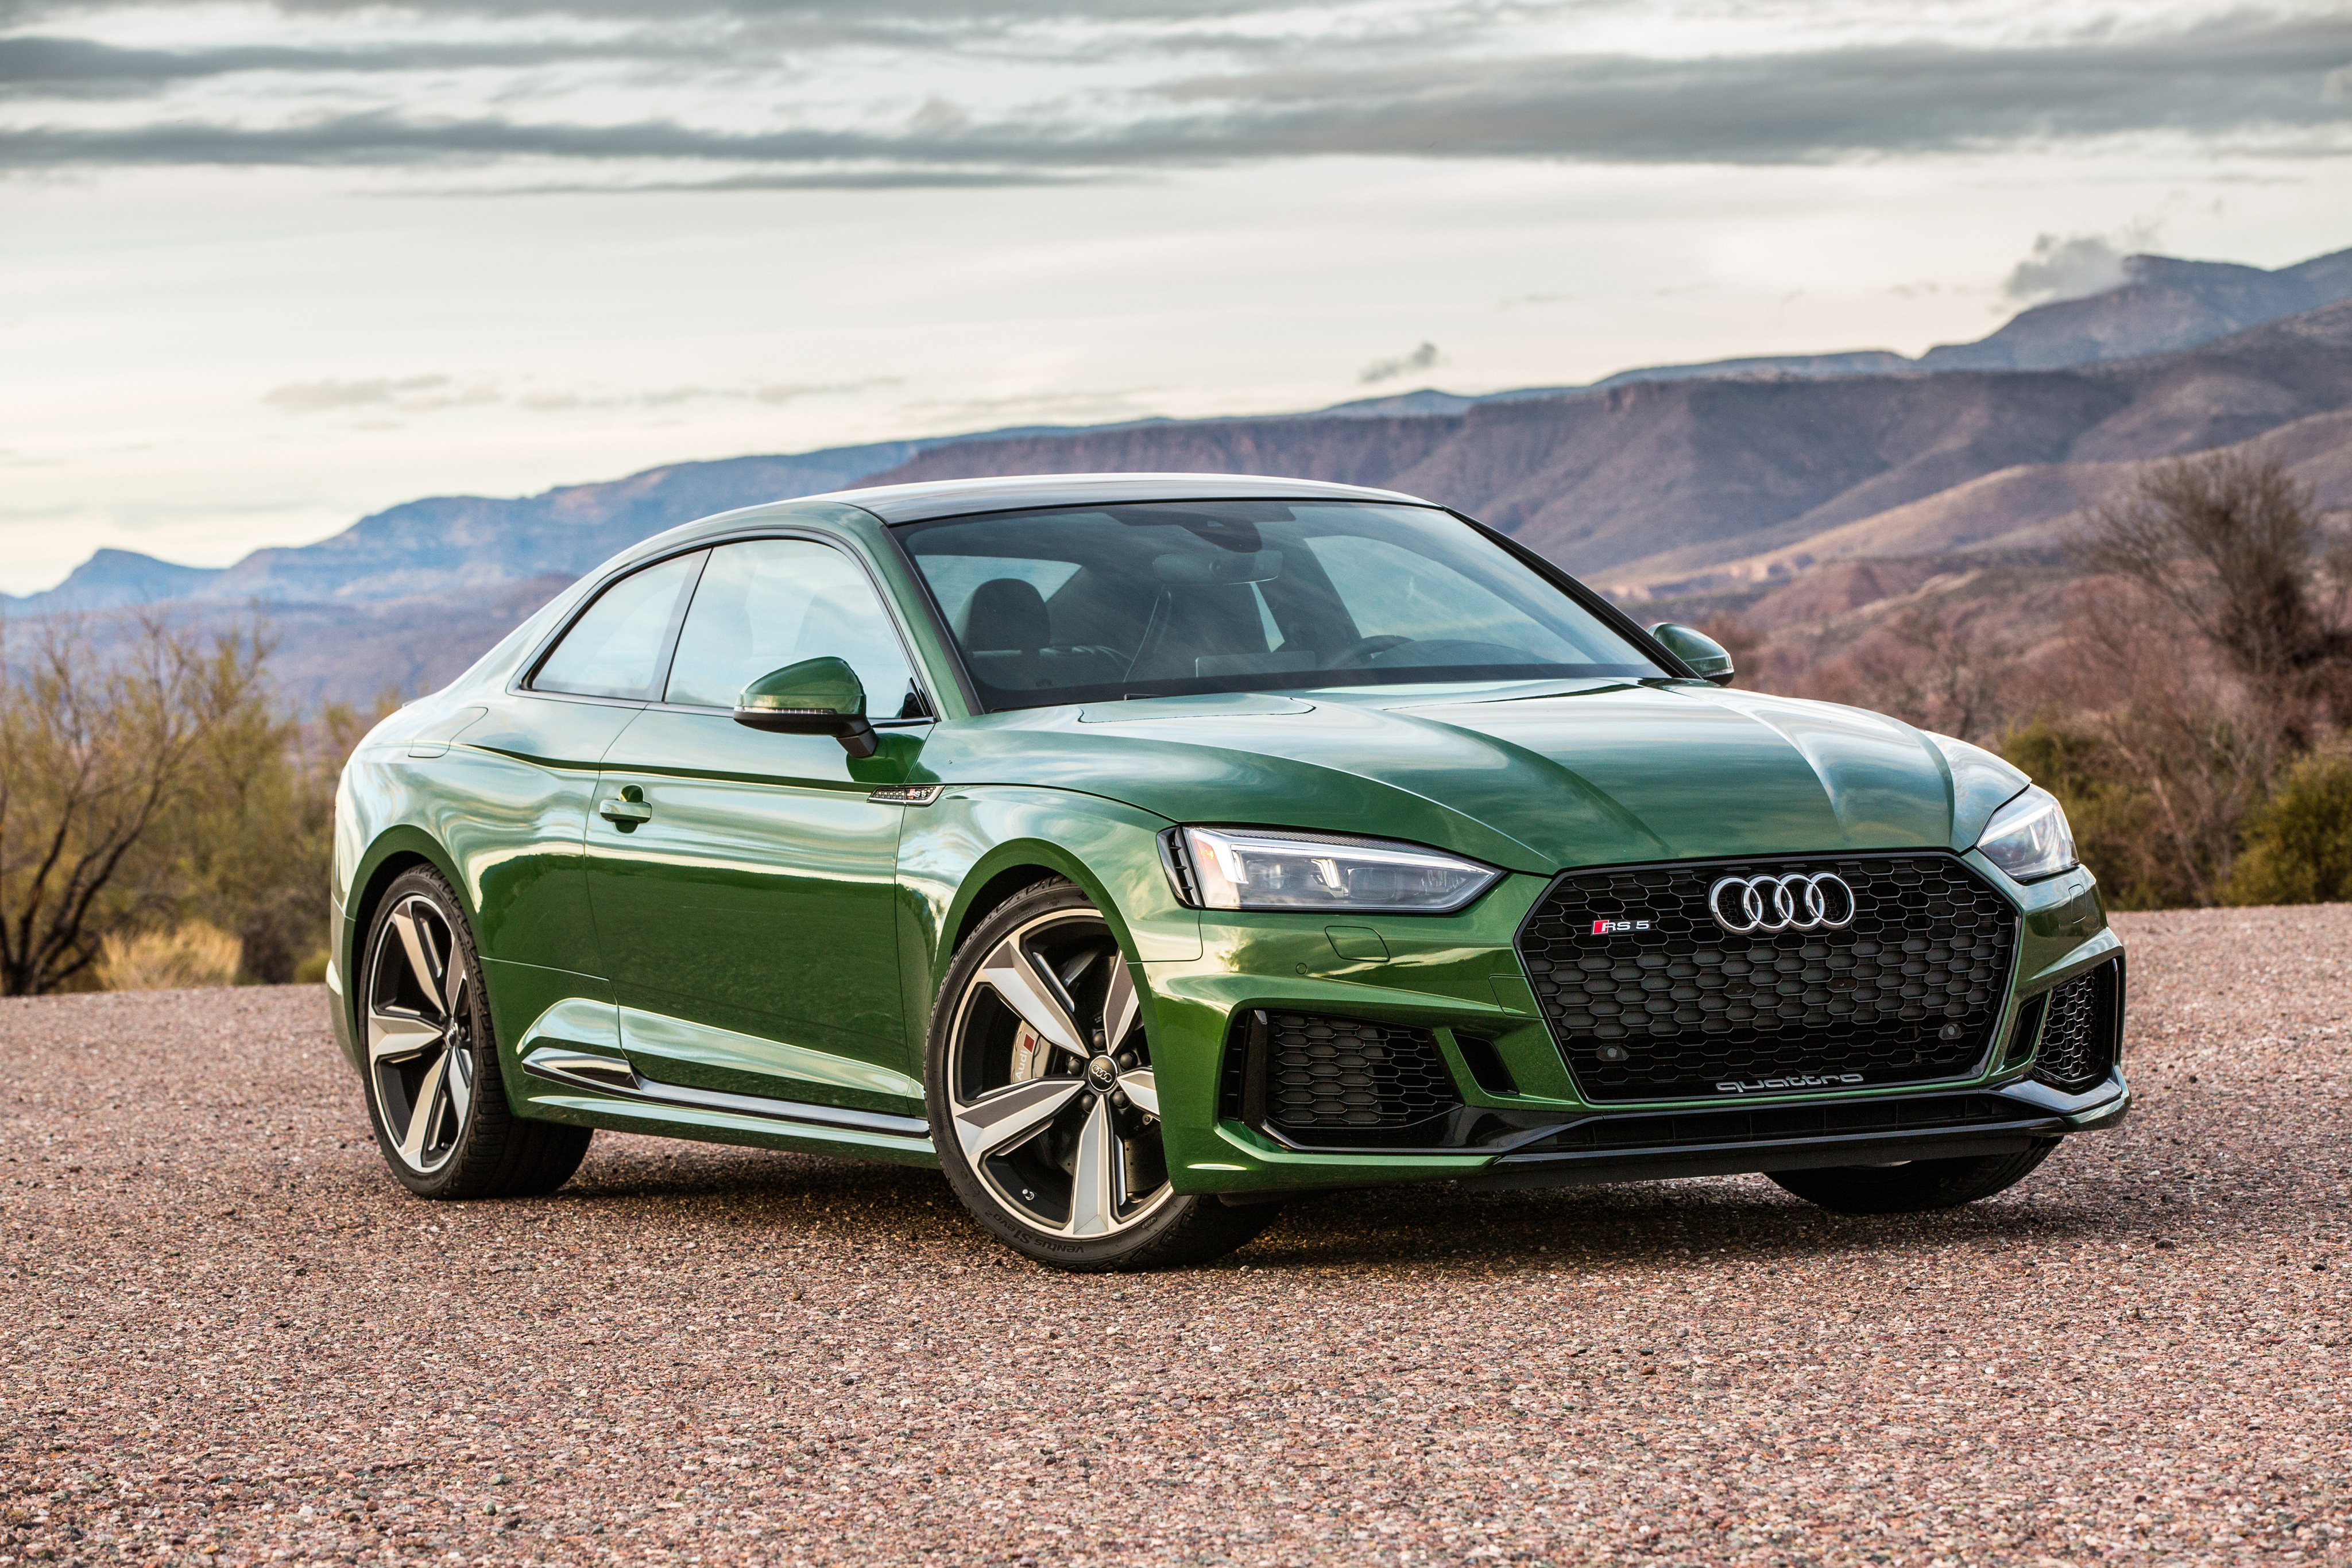 Free photo The 2018 Audi Rs5 in green color